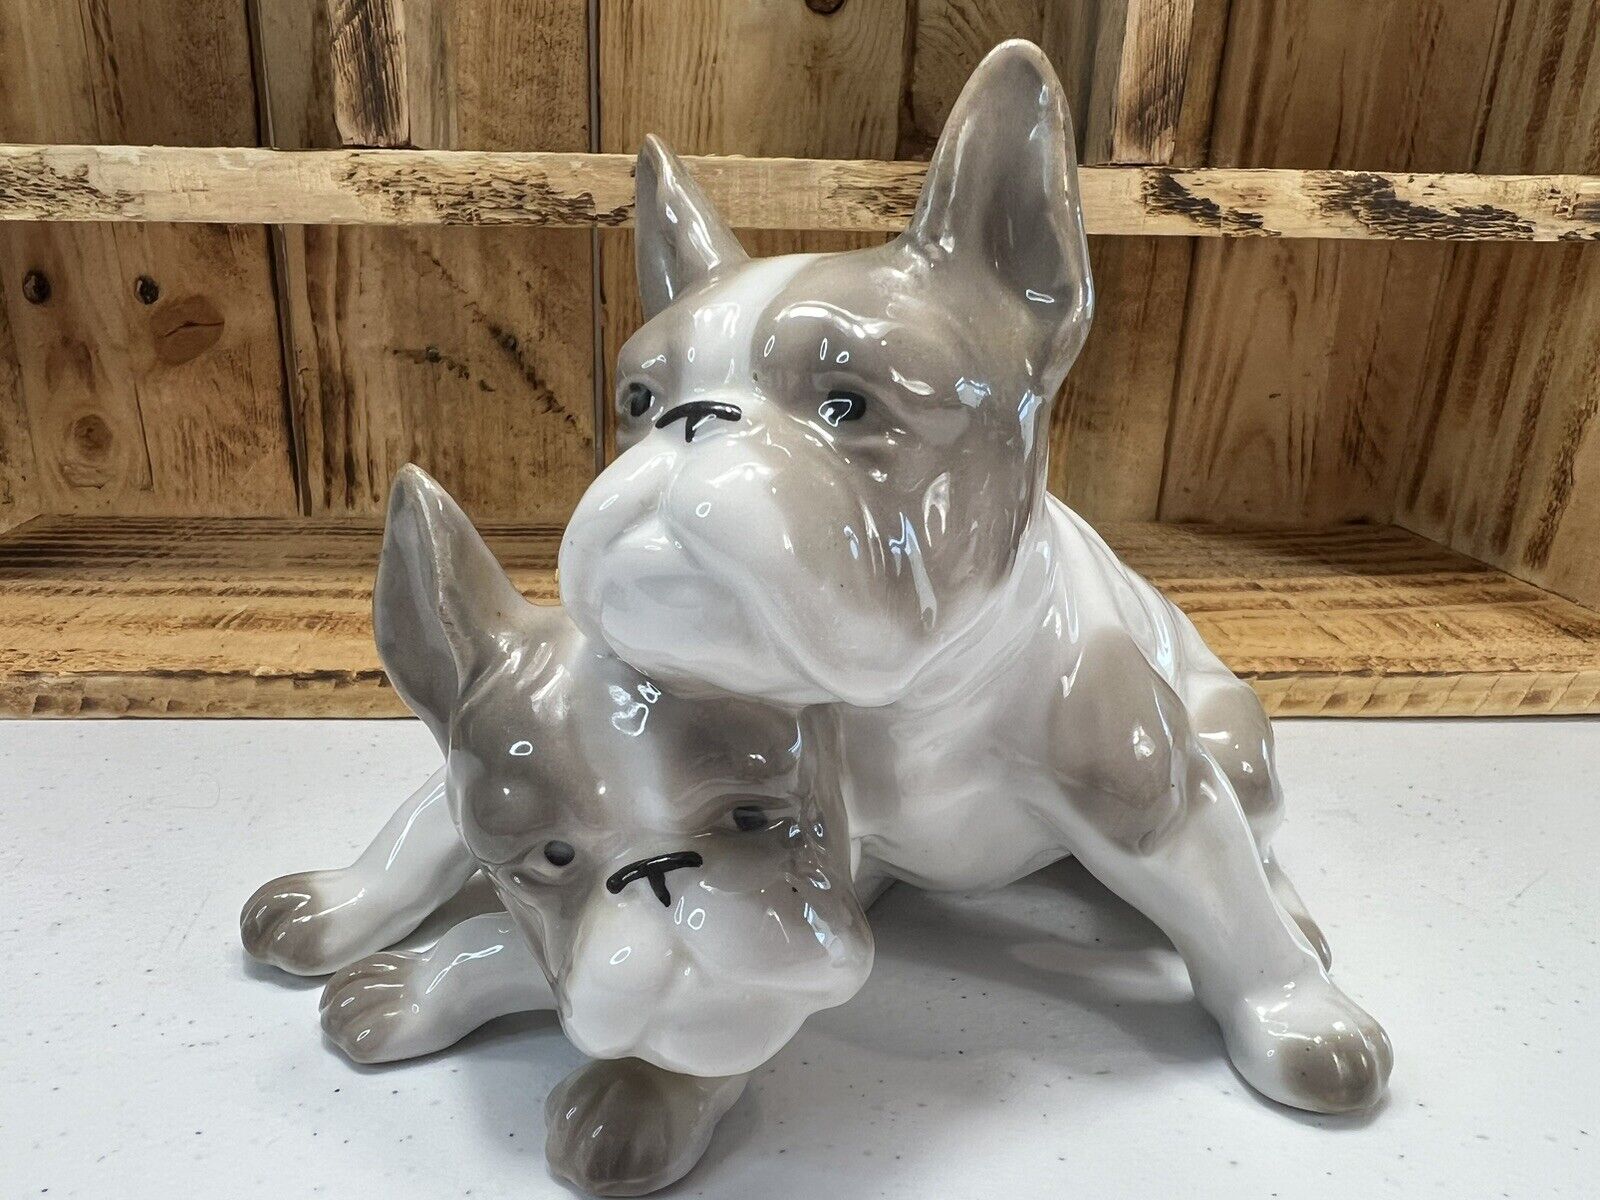 PORCELAIN TWO FRENCH BULLDOGS “BEST FRIENDS” FIGURINE UNBRANDED